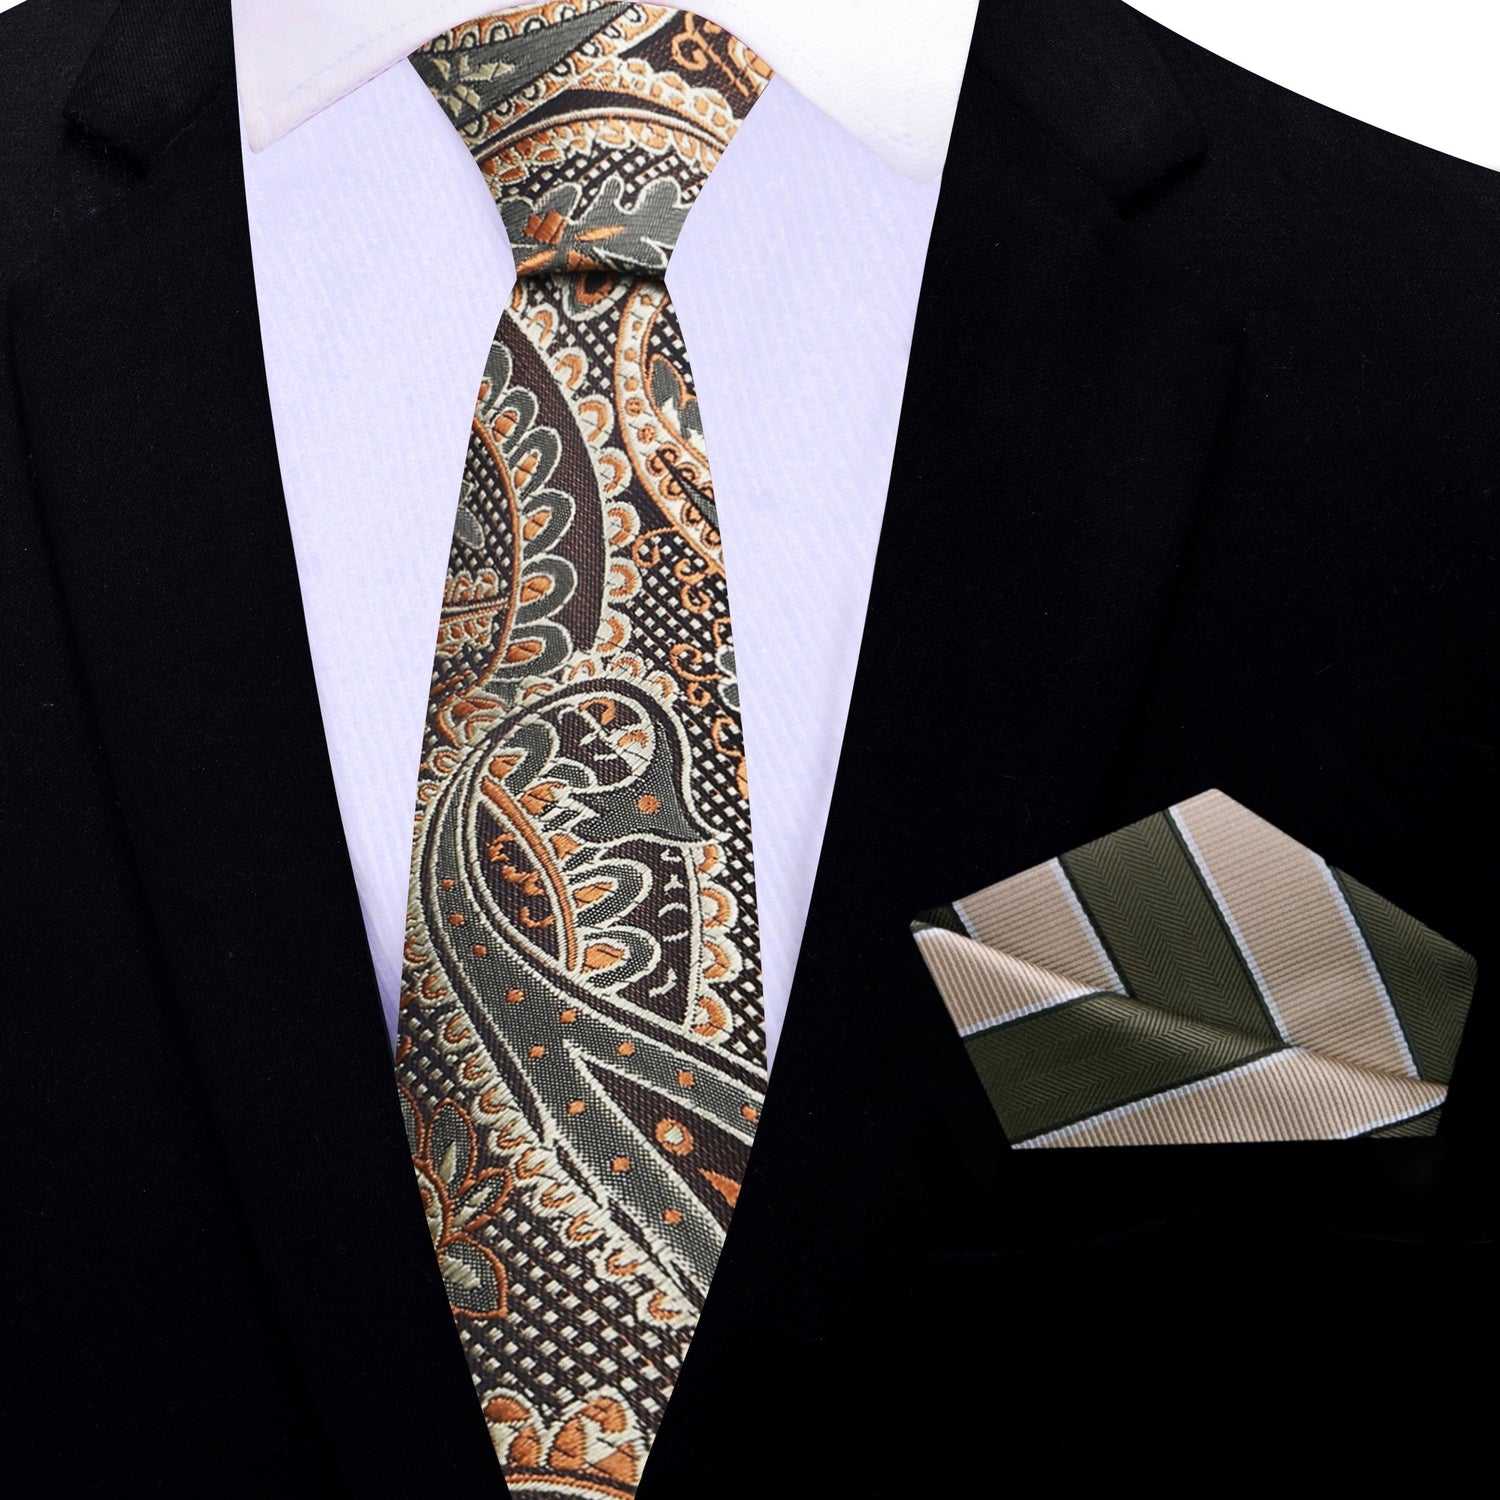 Thin Tie: Shades of Brown Paisley Small Check Paisley Tie and Stripe Pocket Square